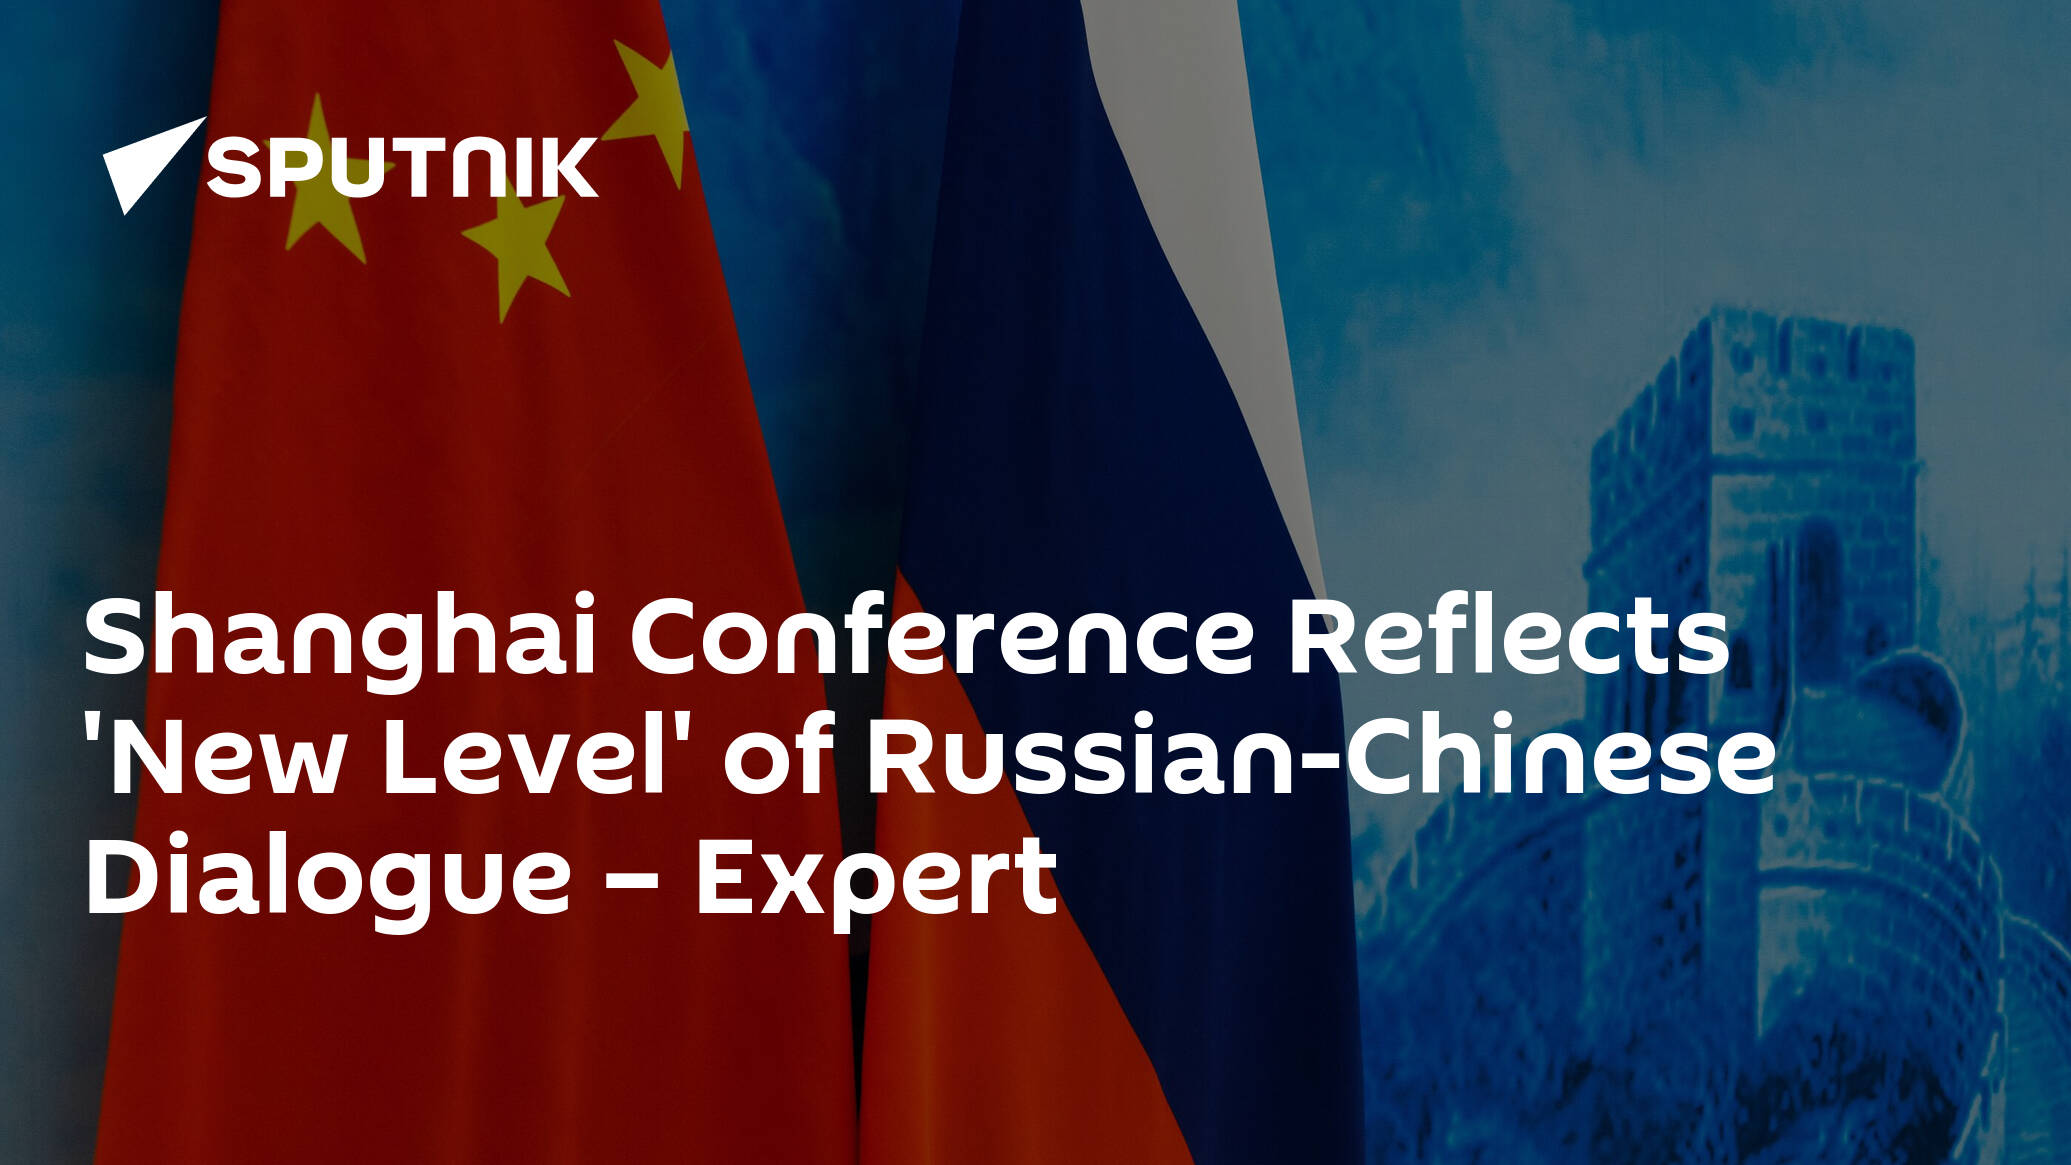 Shanghai Conference Reflects 'New Level' of Russian-Chinese Dialogue – Expert